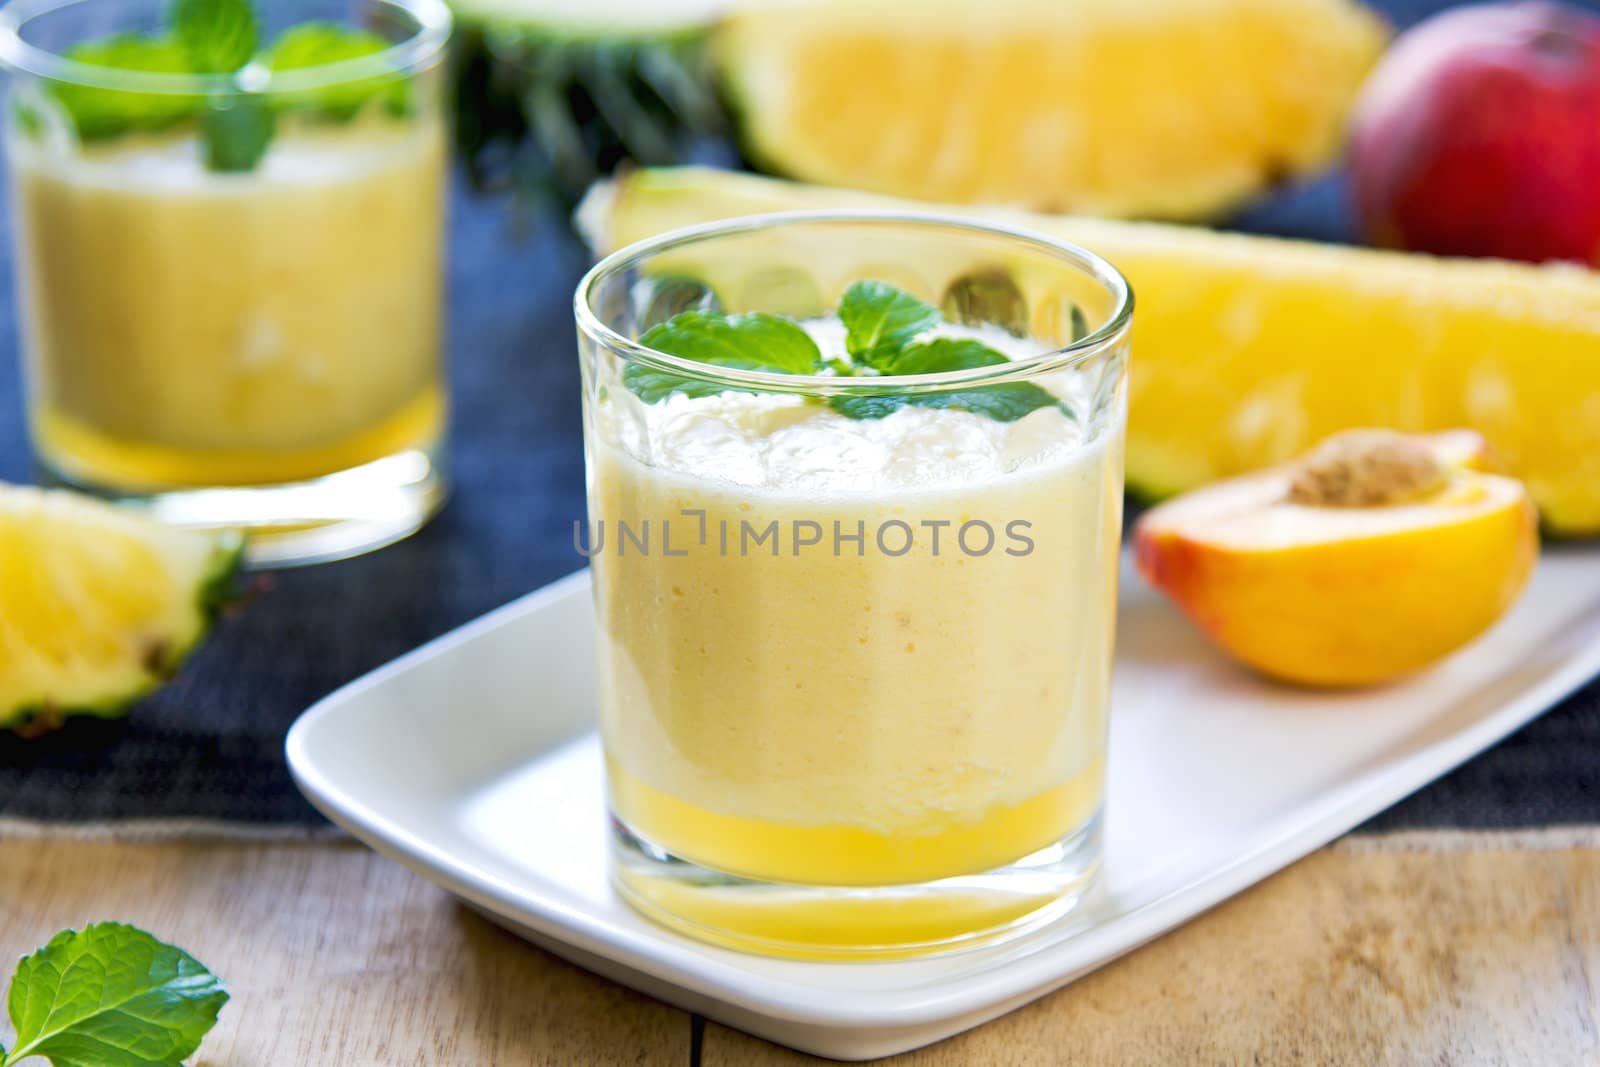 Pineapple with Peach smoothie